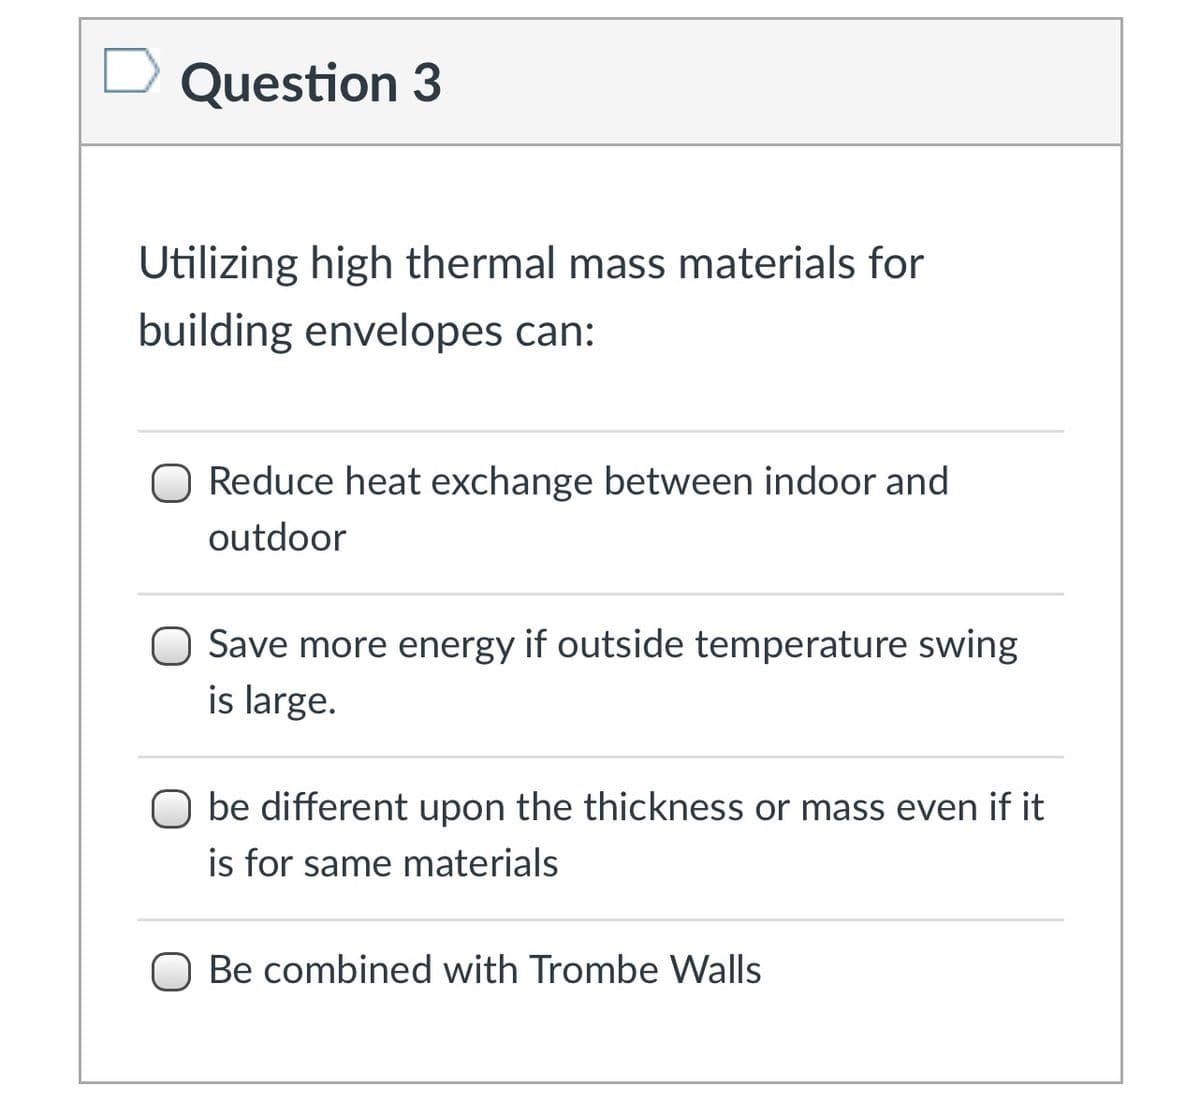 Question 3
Utilizing high thermal mass materials for
building envelopes can:
O Reduce heat exchange between indoor and
outdoor
Save more energy if outside temperature swing
is large.
O be different upon the thickness or mass even if it
is for same materials
O Be combined with Trombe Walls
